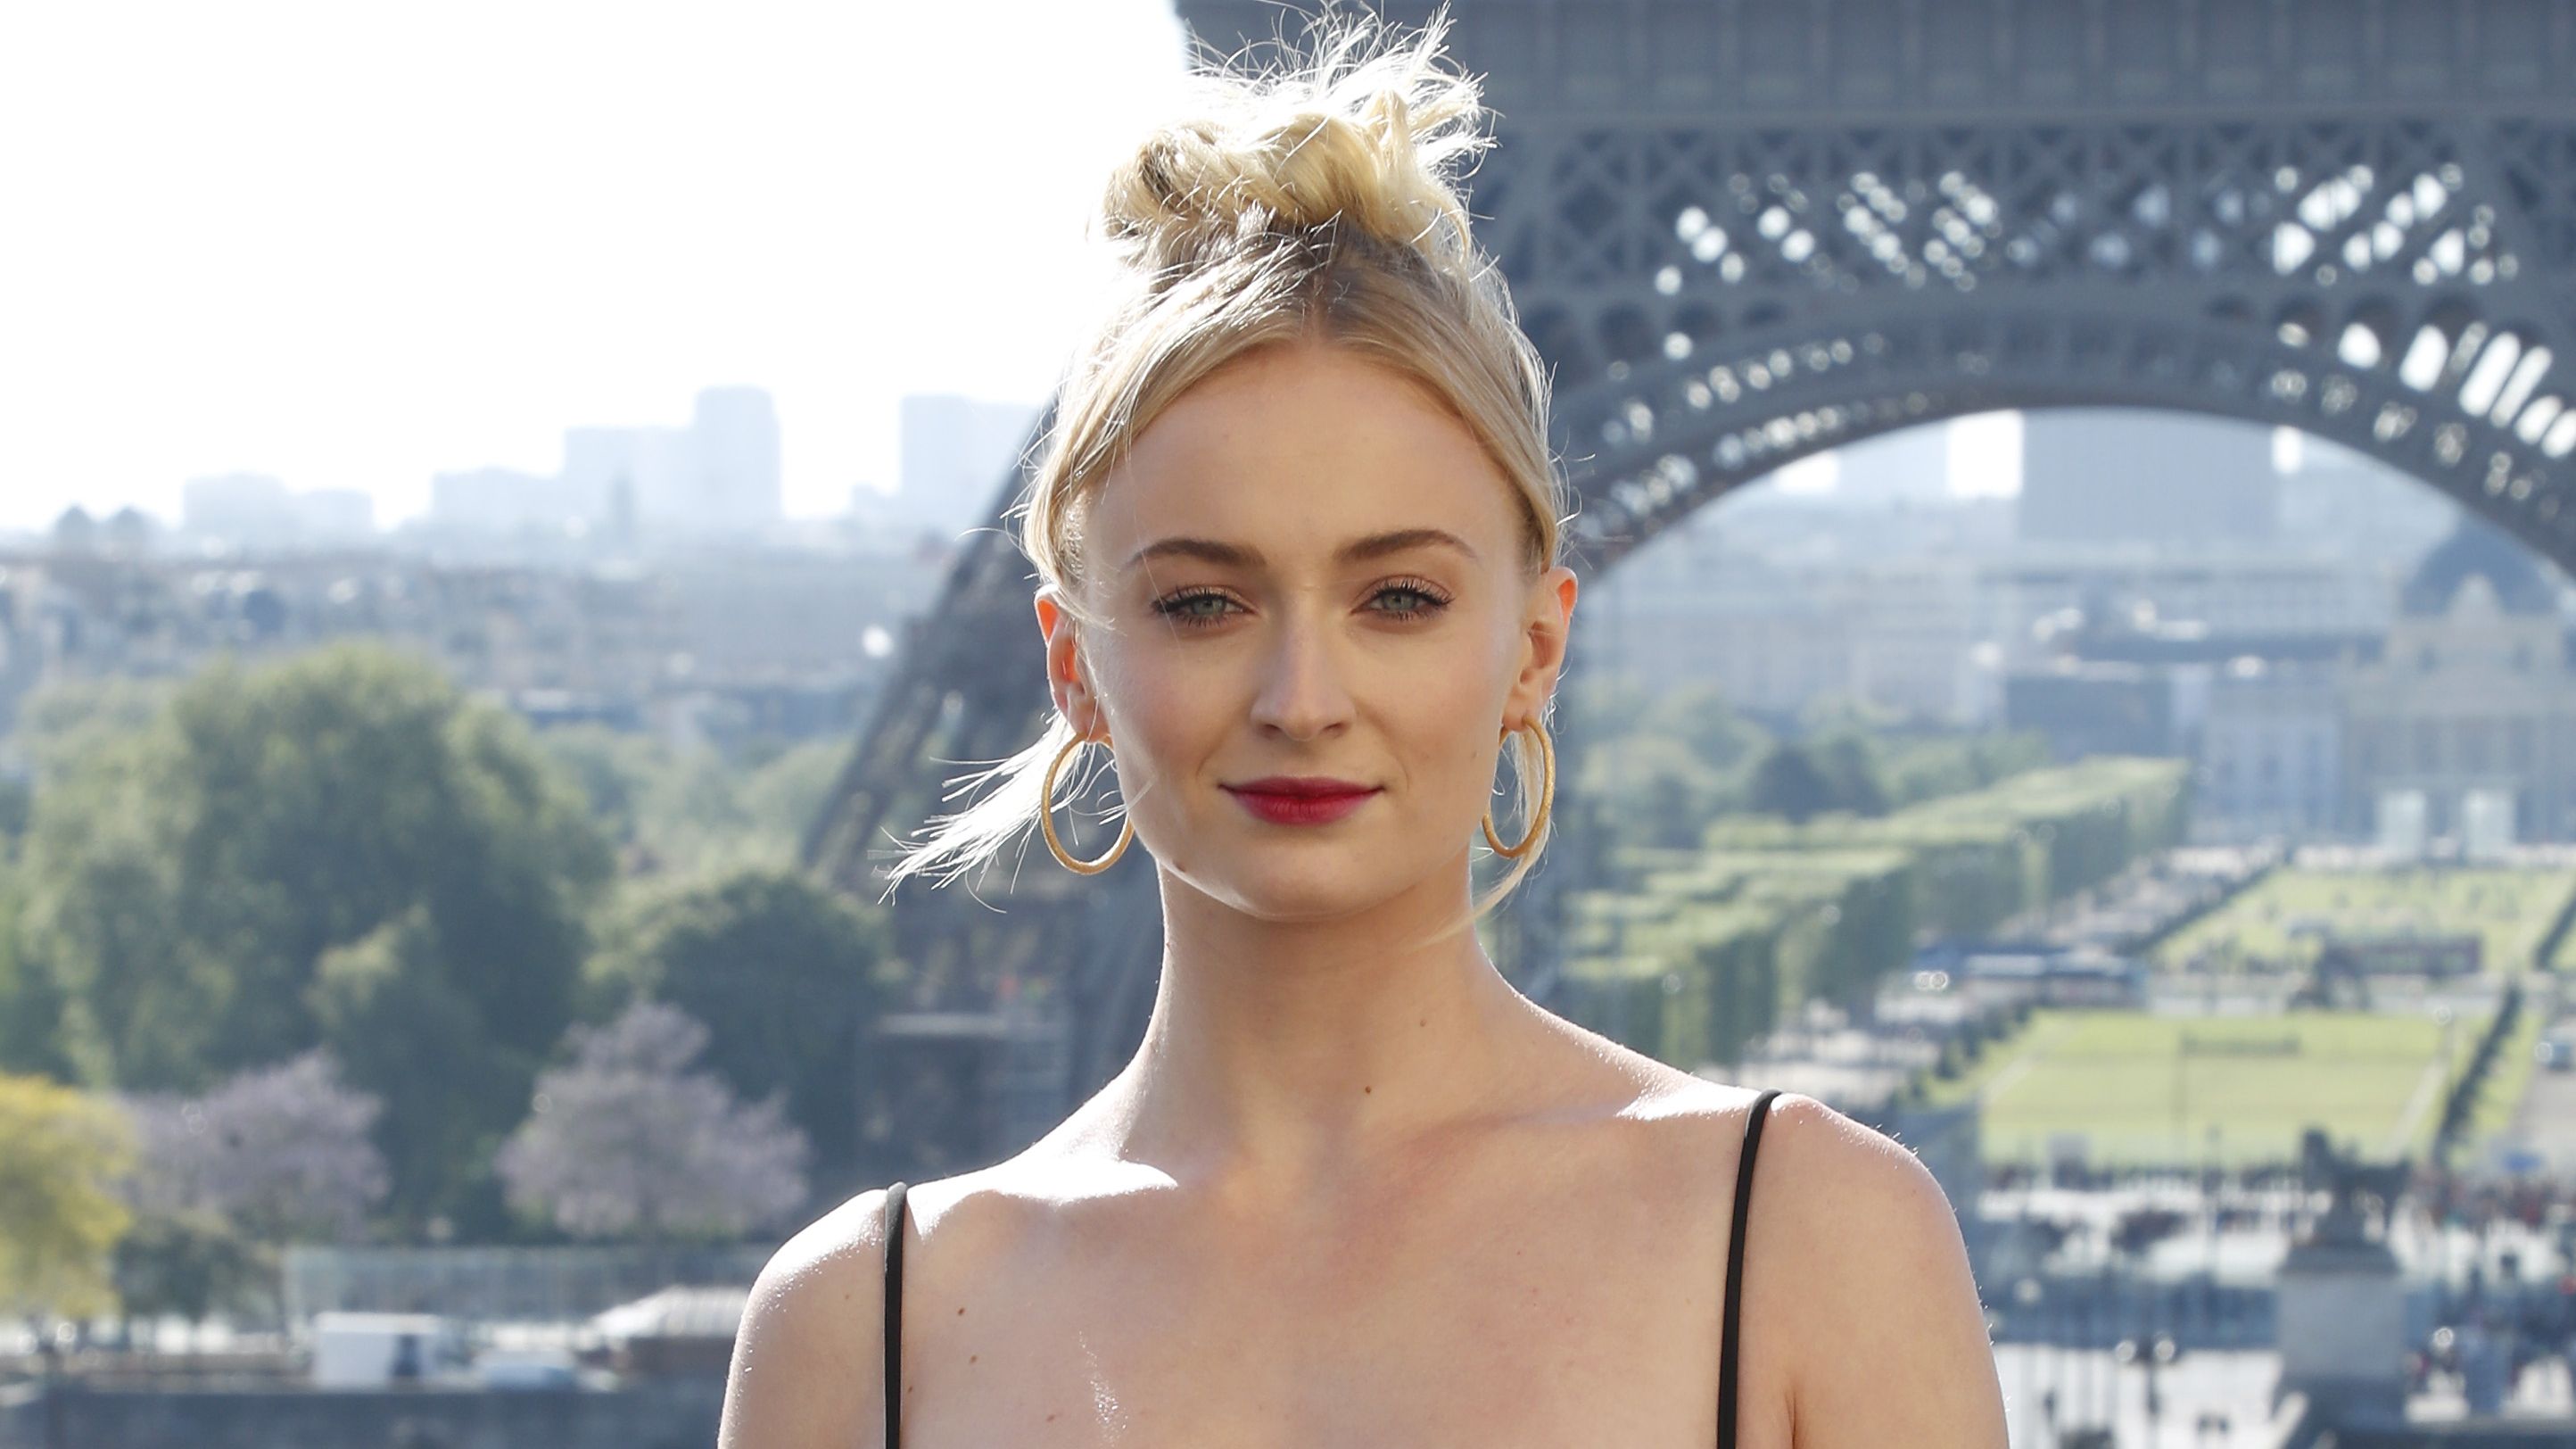 Sophie Turner Didn't Hold Back About That "Disrespectful" Game of Thrones Season 8 Remake Petition